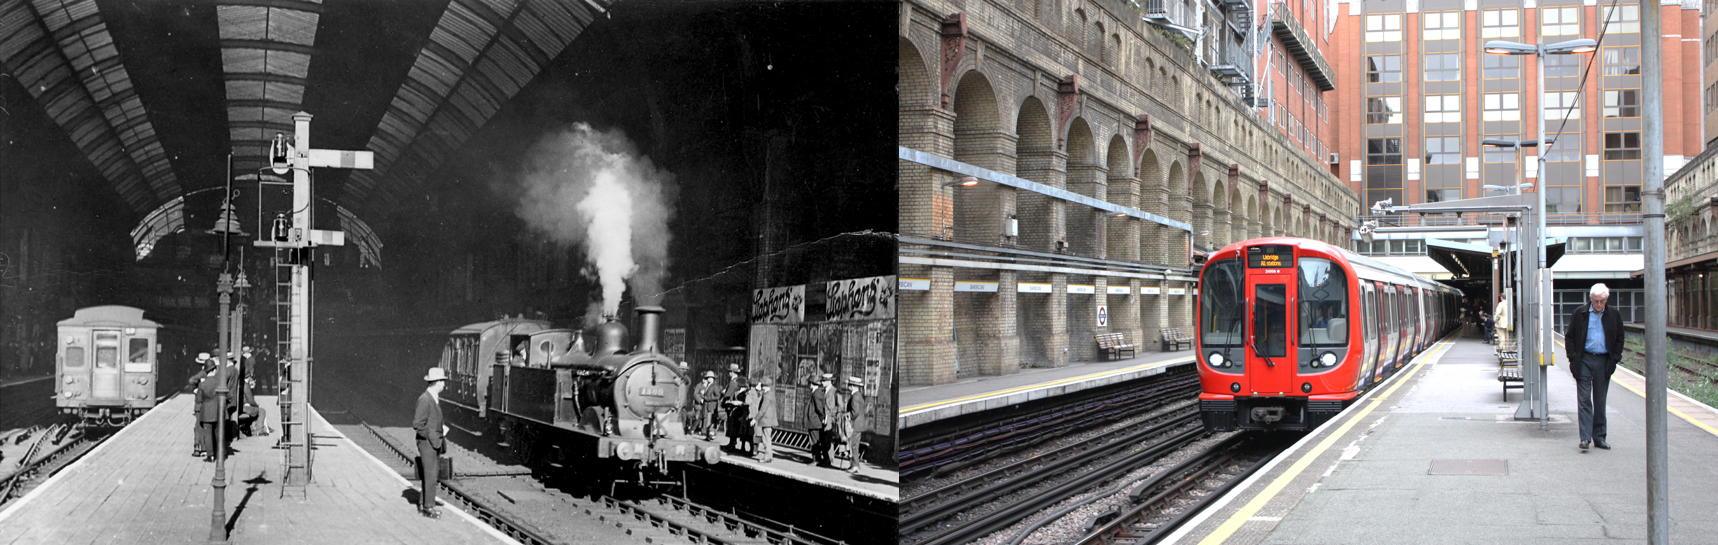 Aldersgate Station (now Barbican), Then & Now. Image Credit: Brian Hardy